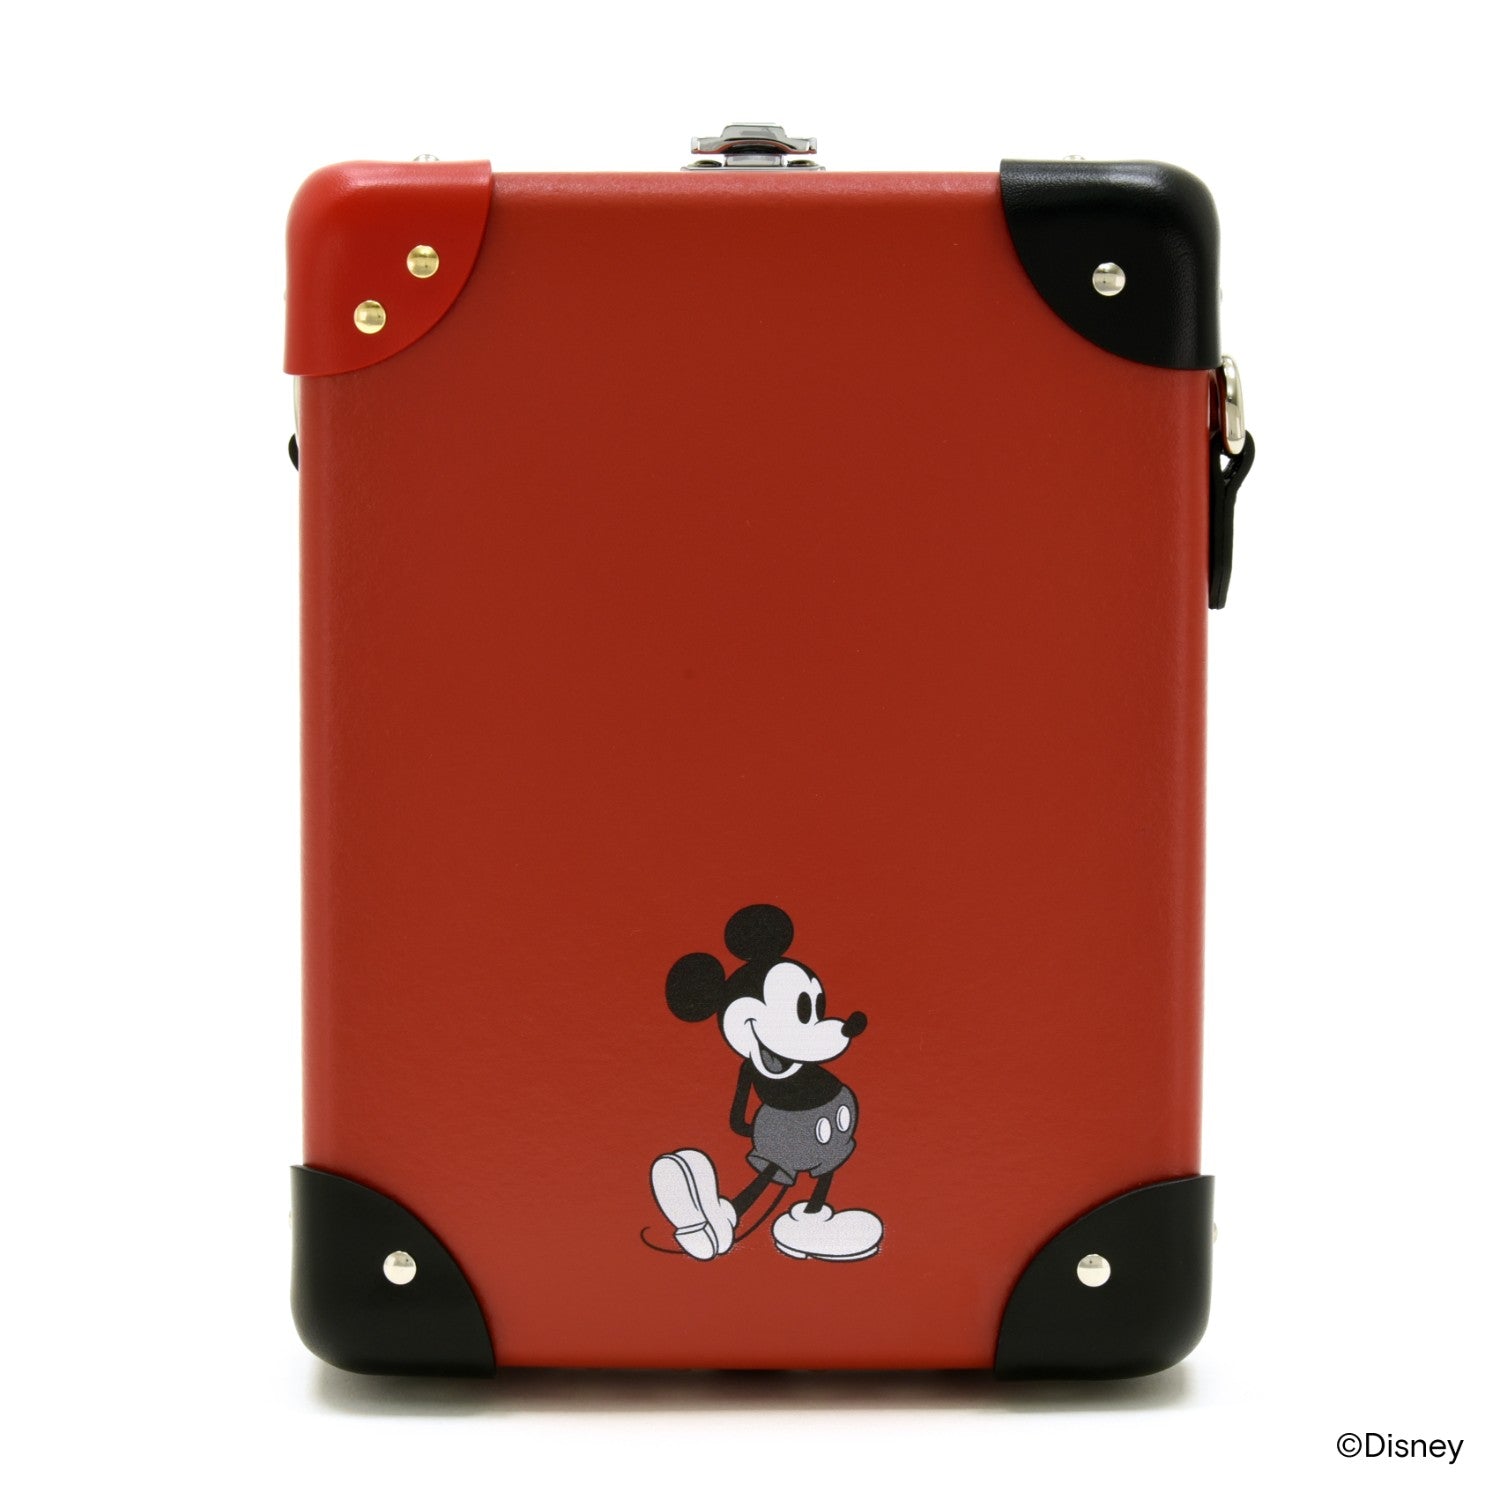 Disney - This Bag Contains Magic Collection · Messenger Case | Red/Black - GLOBE-TROTTER